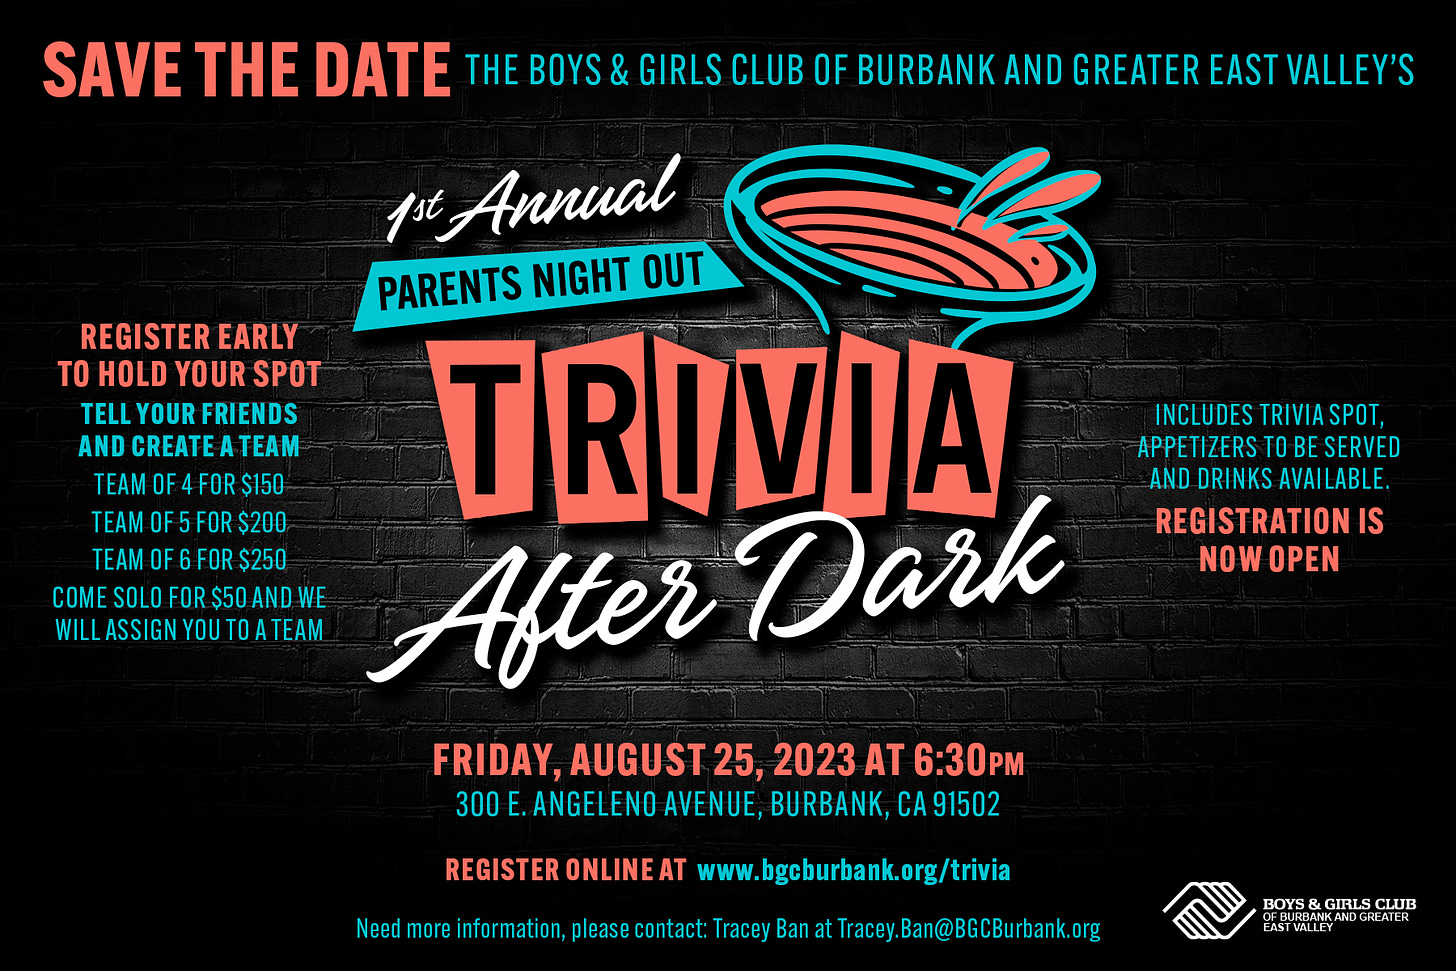 May be an image of text that says 'SAVE THE DATE THE BOYS & GIRLS CLUB OF BURBANK AND GREATER EAST VALLEY'S pst Annual PARENTS NIGHT OUT REGISTER EARLY HOLD YOUR SPOT TELL YOUR FRIENDS AND CREATE ATEAM TEAM OF FOR $150 TRIVIA TEAMOF5FOR$200 TEAMOF6FOR$250 CM WILLSSIG YOUTOATEAM After Dark FRIDAY, AUGUST 25, 2023 AT 6:30PM 300 .ANGELENO AVENUE, BURBANK, A91502 INCLUDES TRIVIA SPOT, APPETIZERS O BE SERVED AND DRINKS AVAI LABLE. REGISTRATIONIS NOW OPEN Need REGISTERONLINEAT www.bgcburbank.org/trivia information, please contact: BOYS & GIRLS BO CLUB EA'